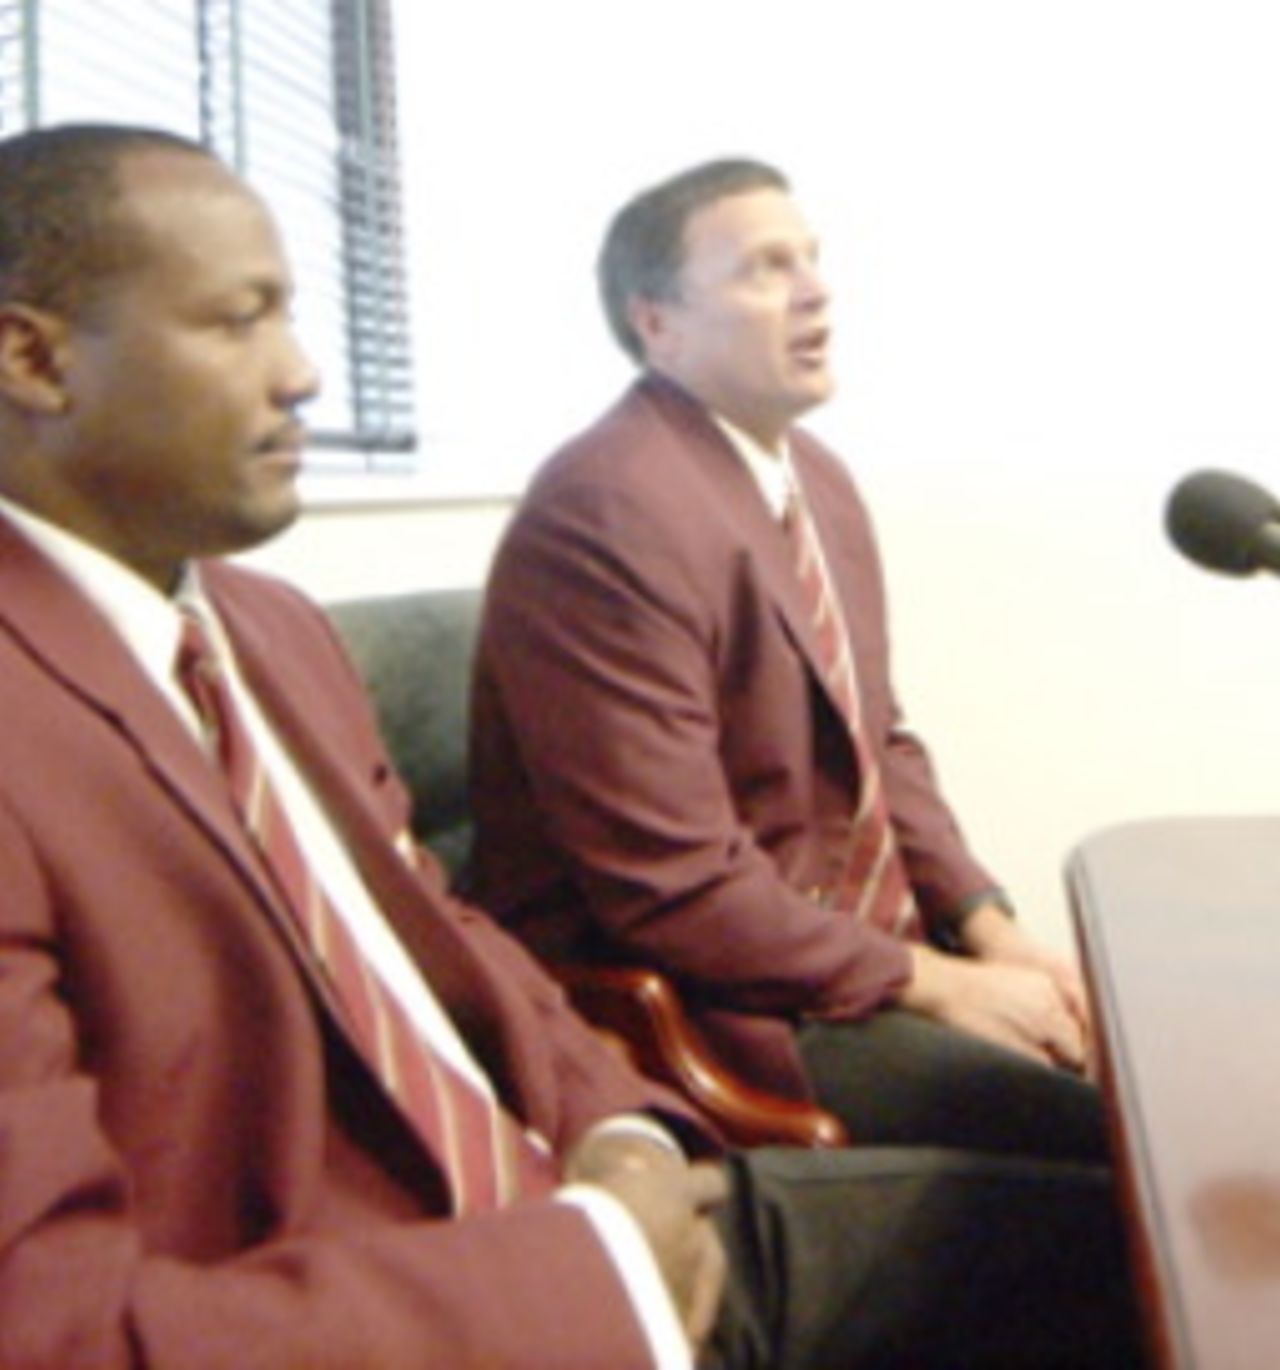 Brian Lara and Bennett King take questions from the press at the Grantley Adams Internatonal Airport on the way to the DLF Cup, Bridgetown, September 7, 2006 